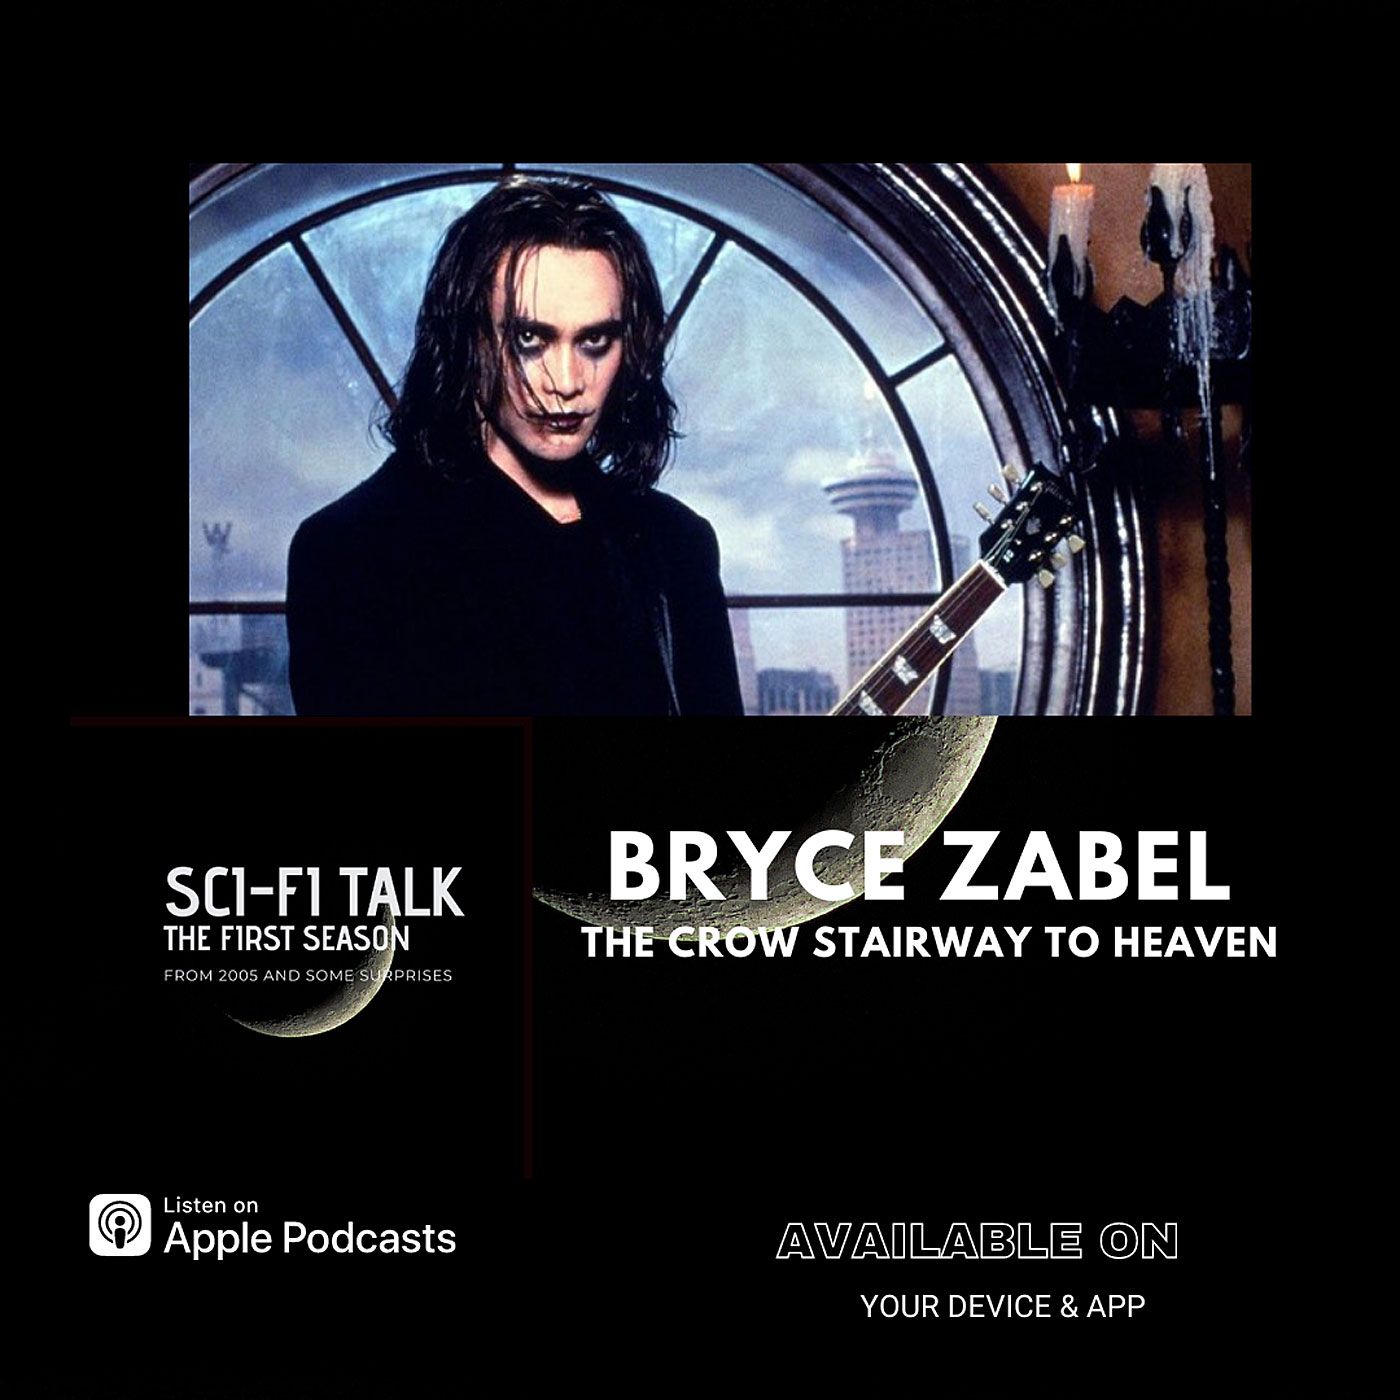 Bryce Zabel The Crow Stairway To Heaven